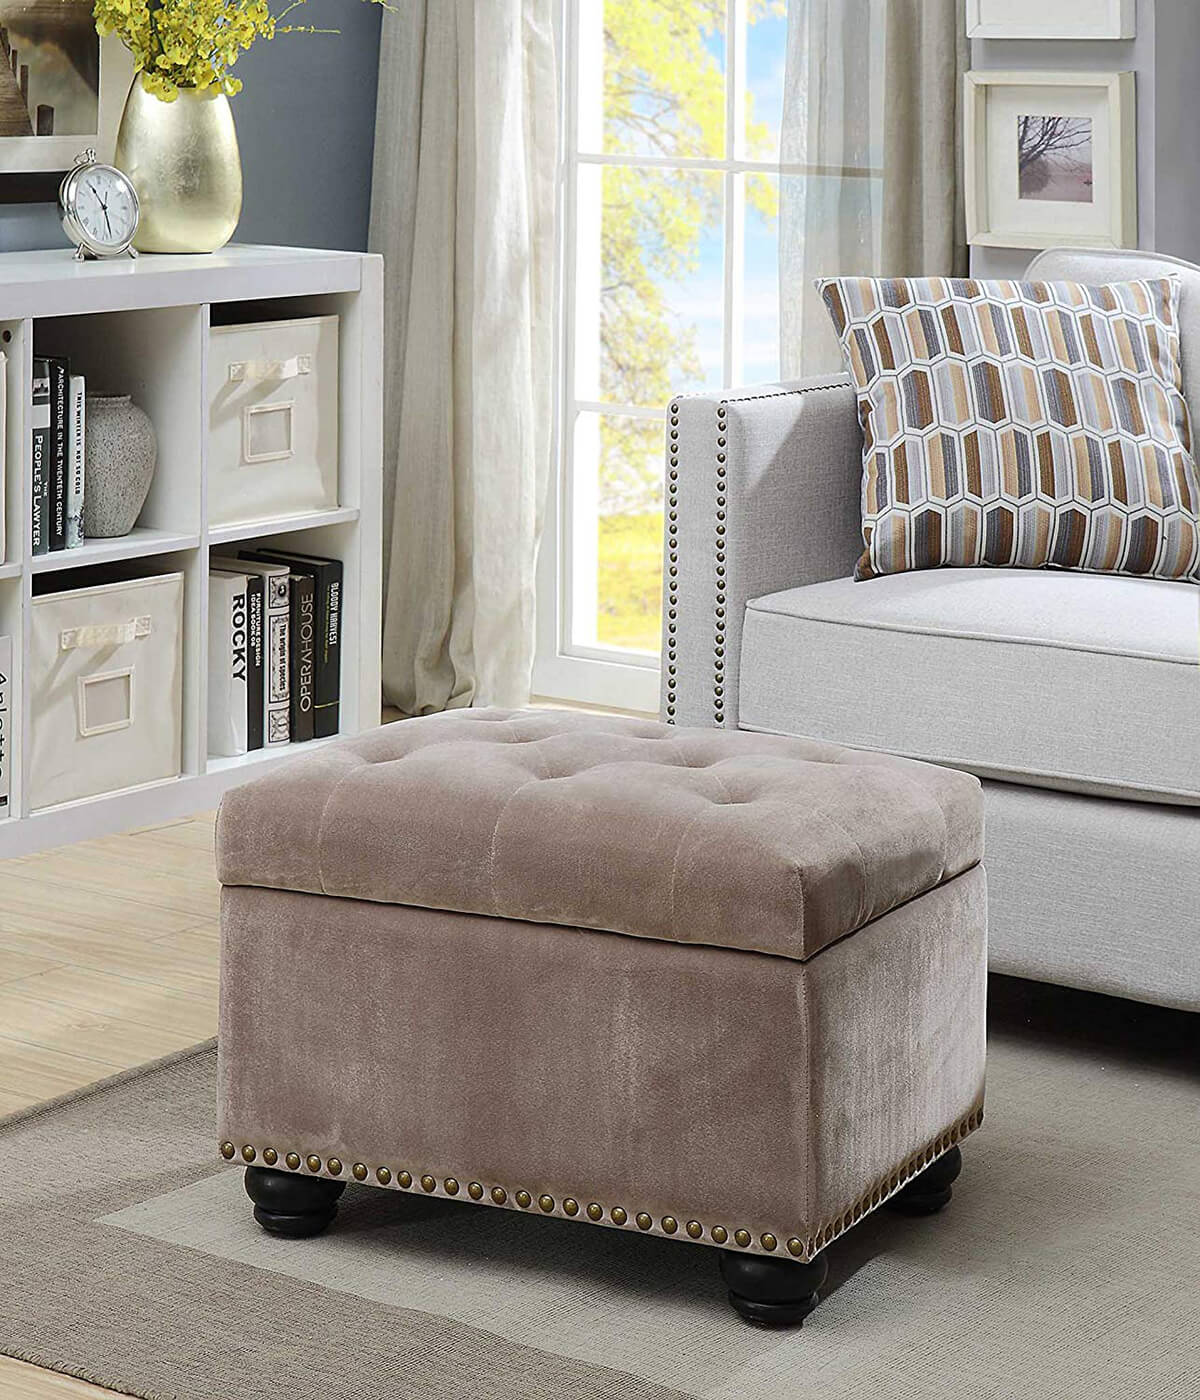 13-best-hassock-and-ottoman-ideas-to-buy-homebnc